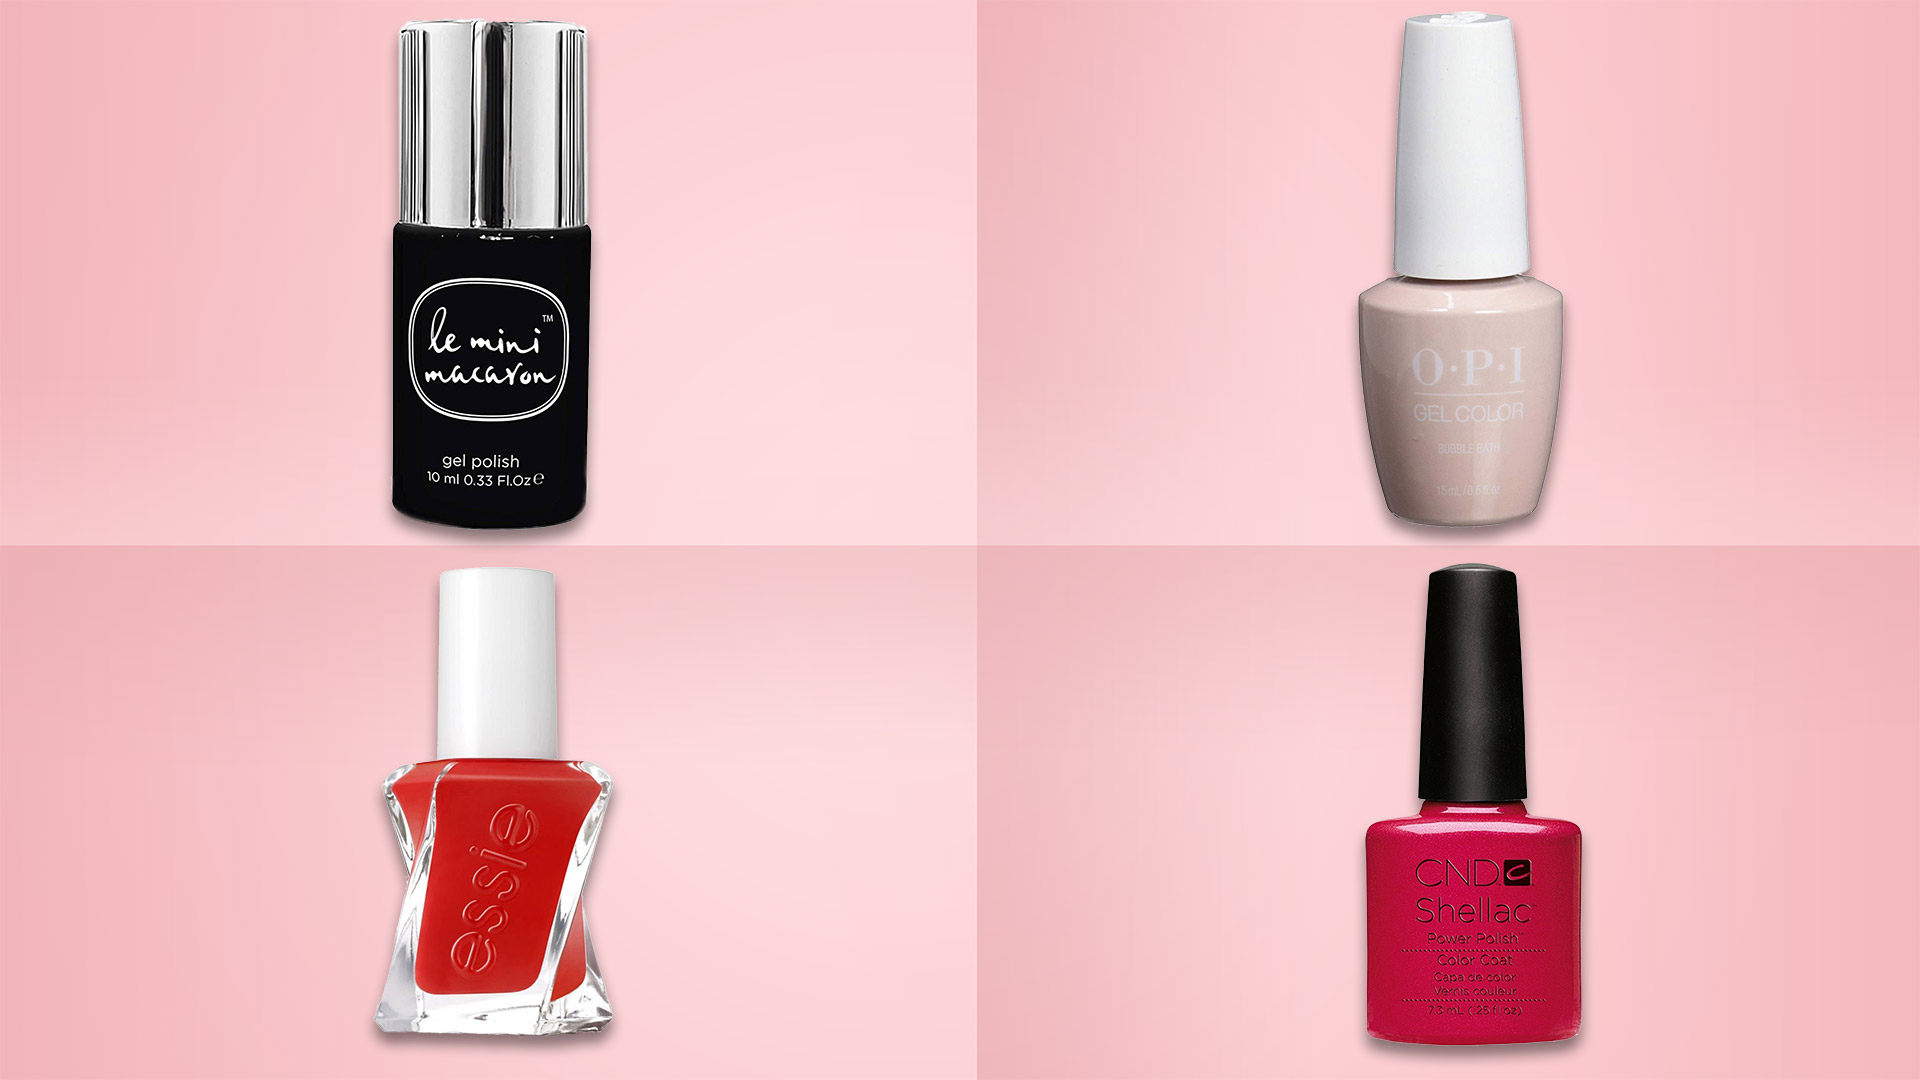 The Best Gel Nail Polish For Long-Lasting Manicures At Home